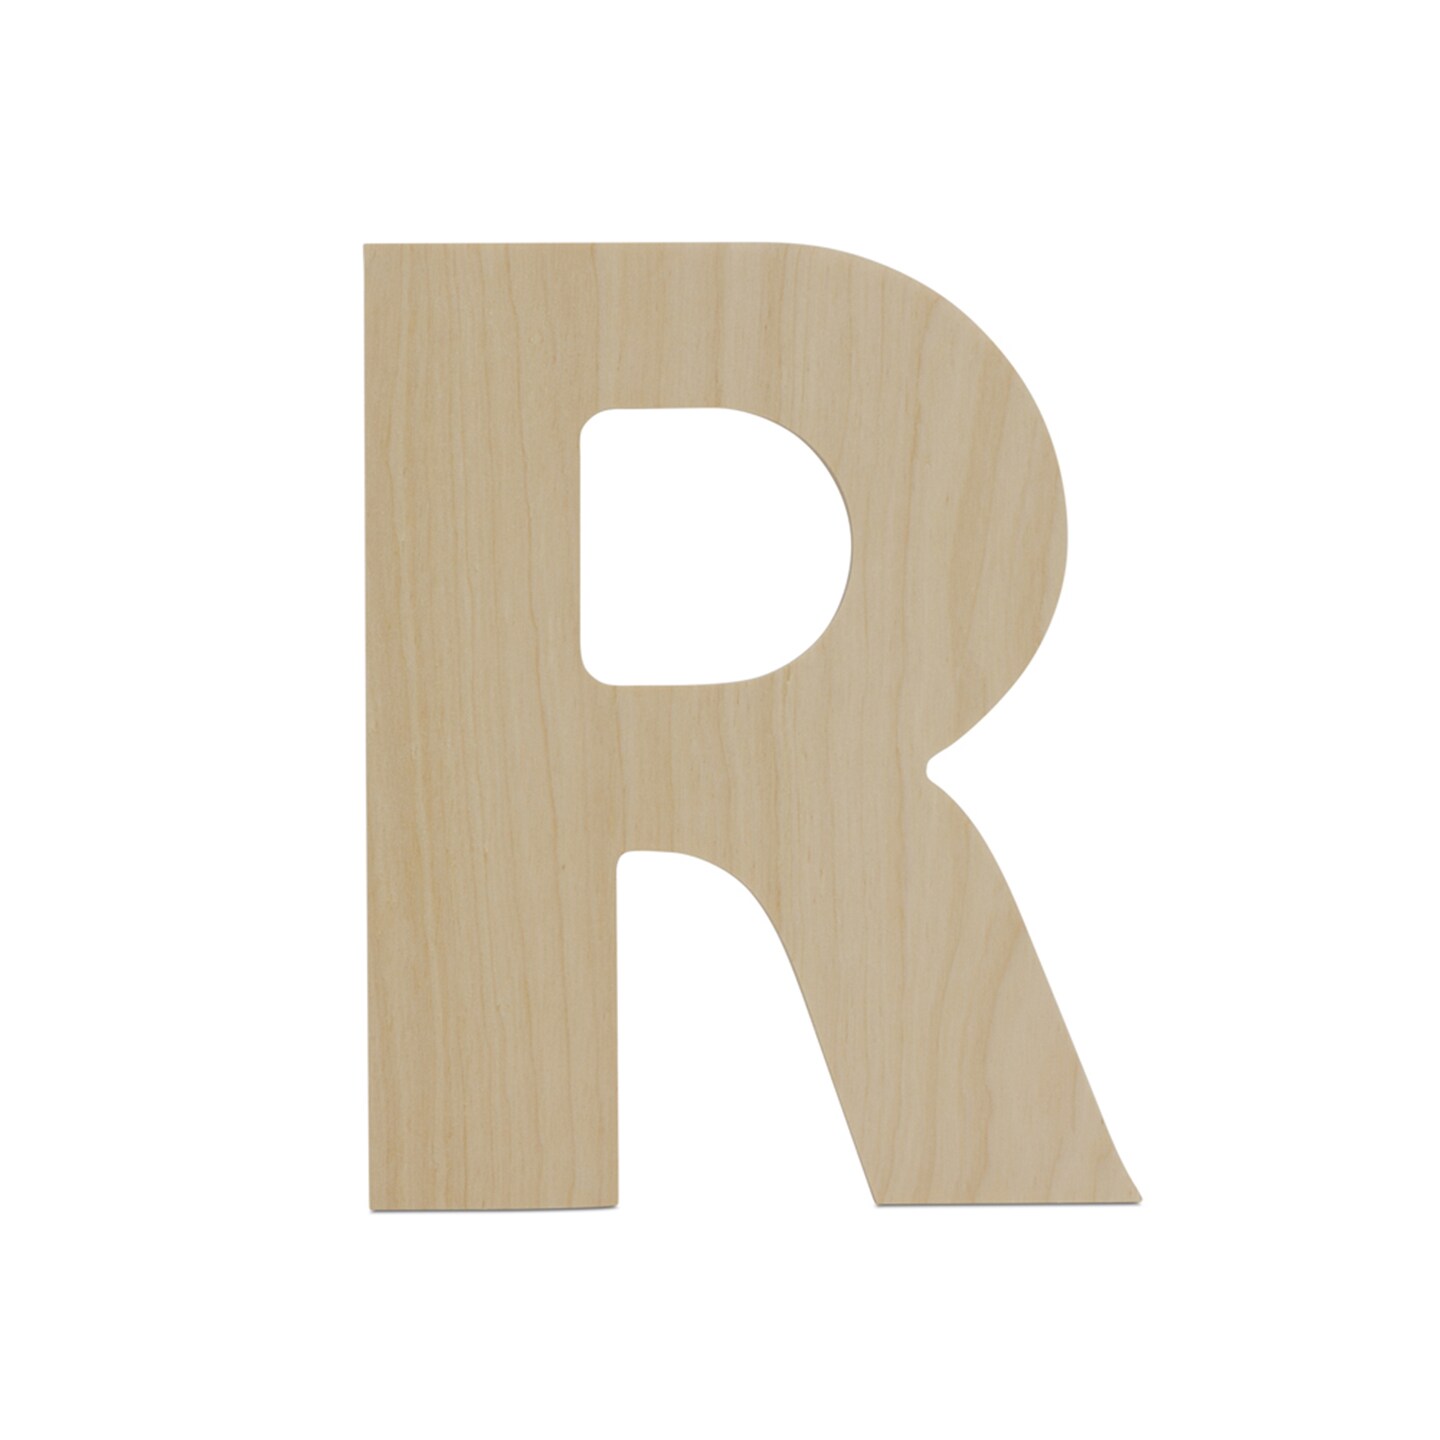 Wooden Letter R 12 inch or 8 inch, Unfinished Large Wood Letters for Crafts | Woodpeckers